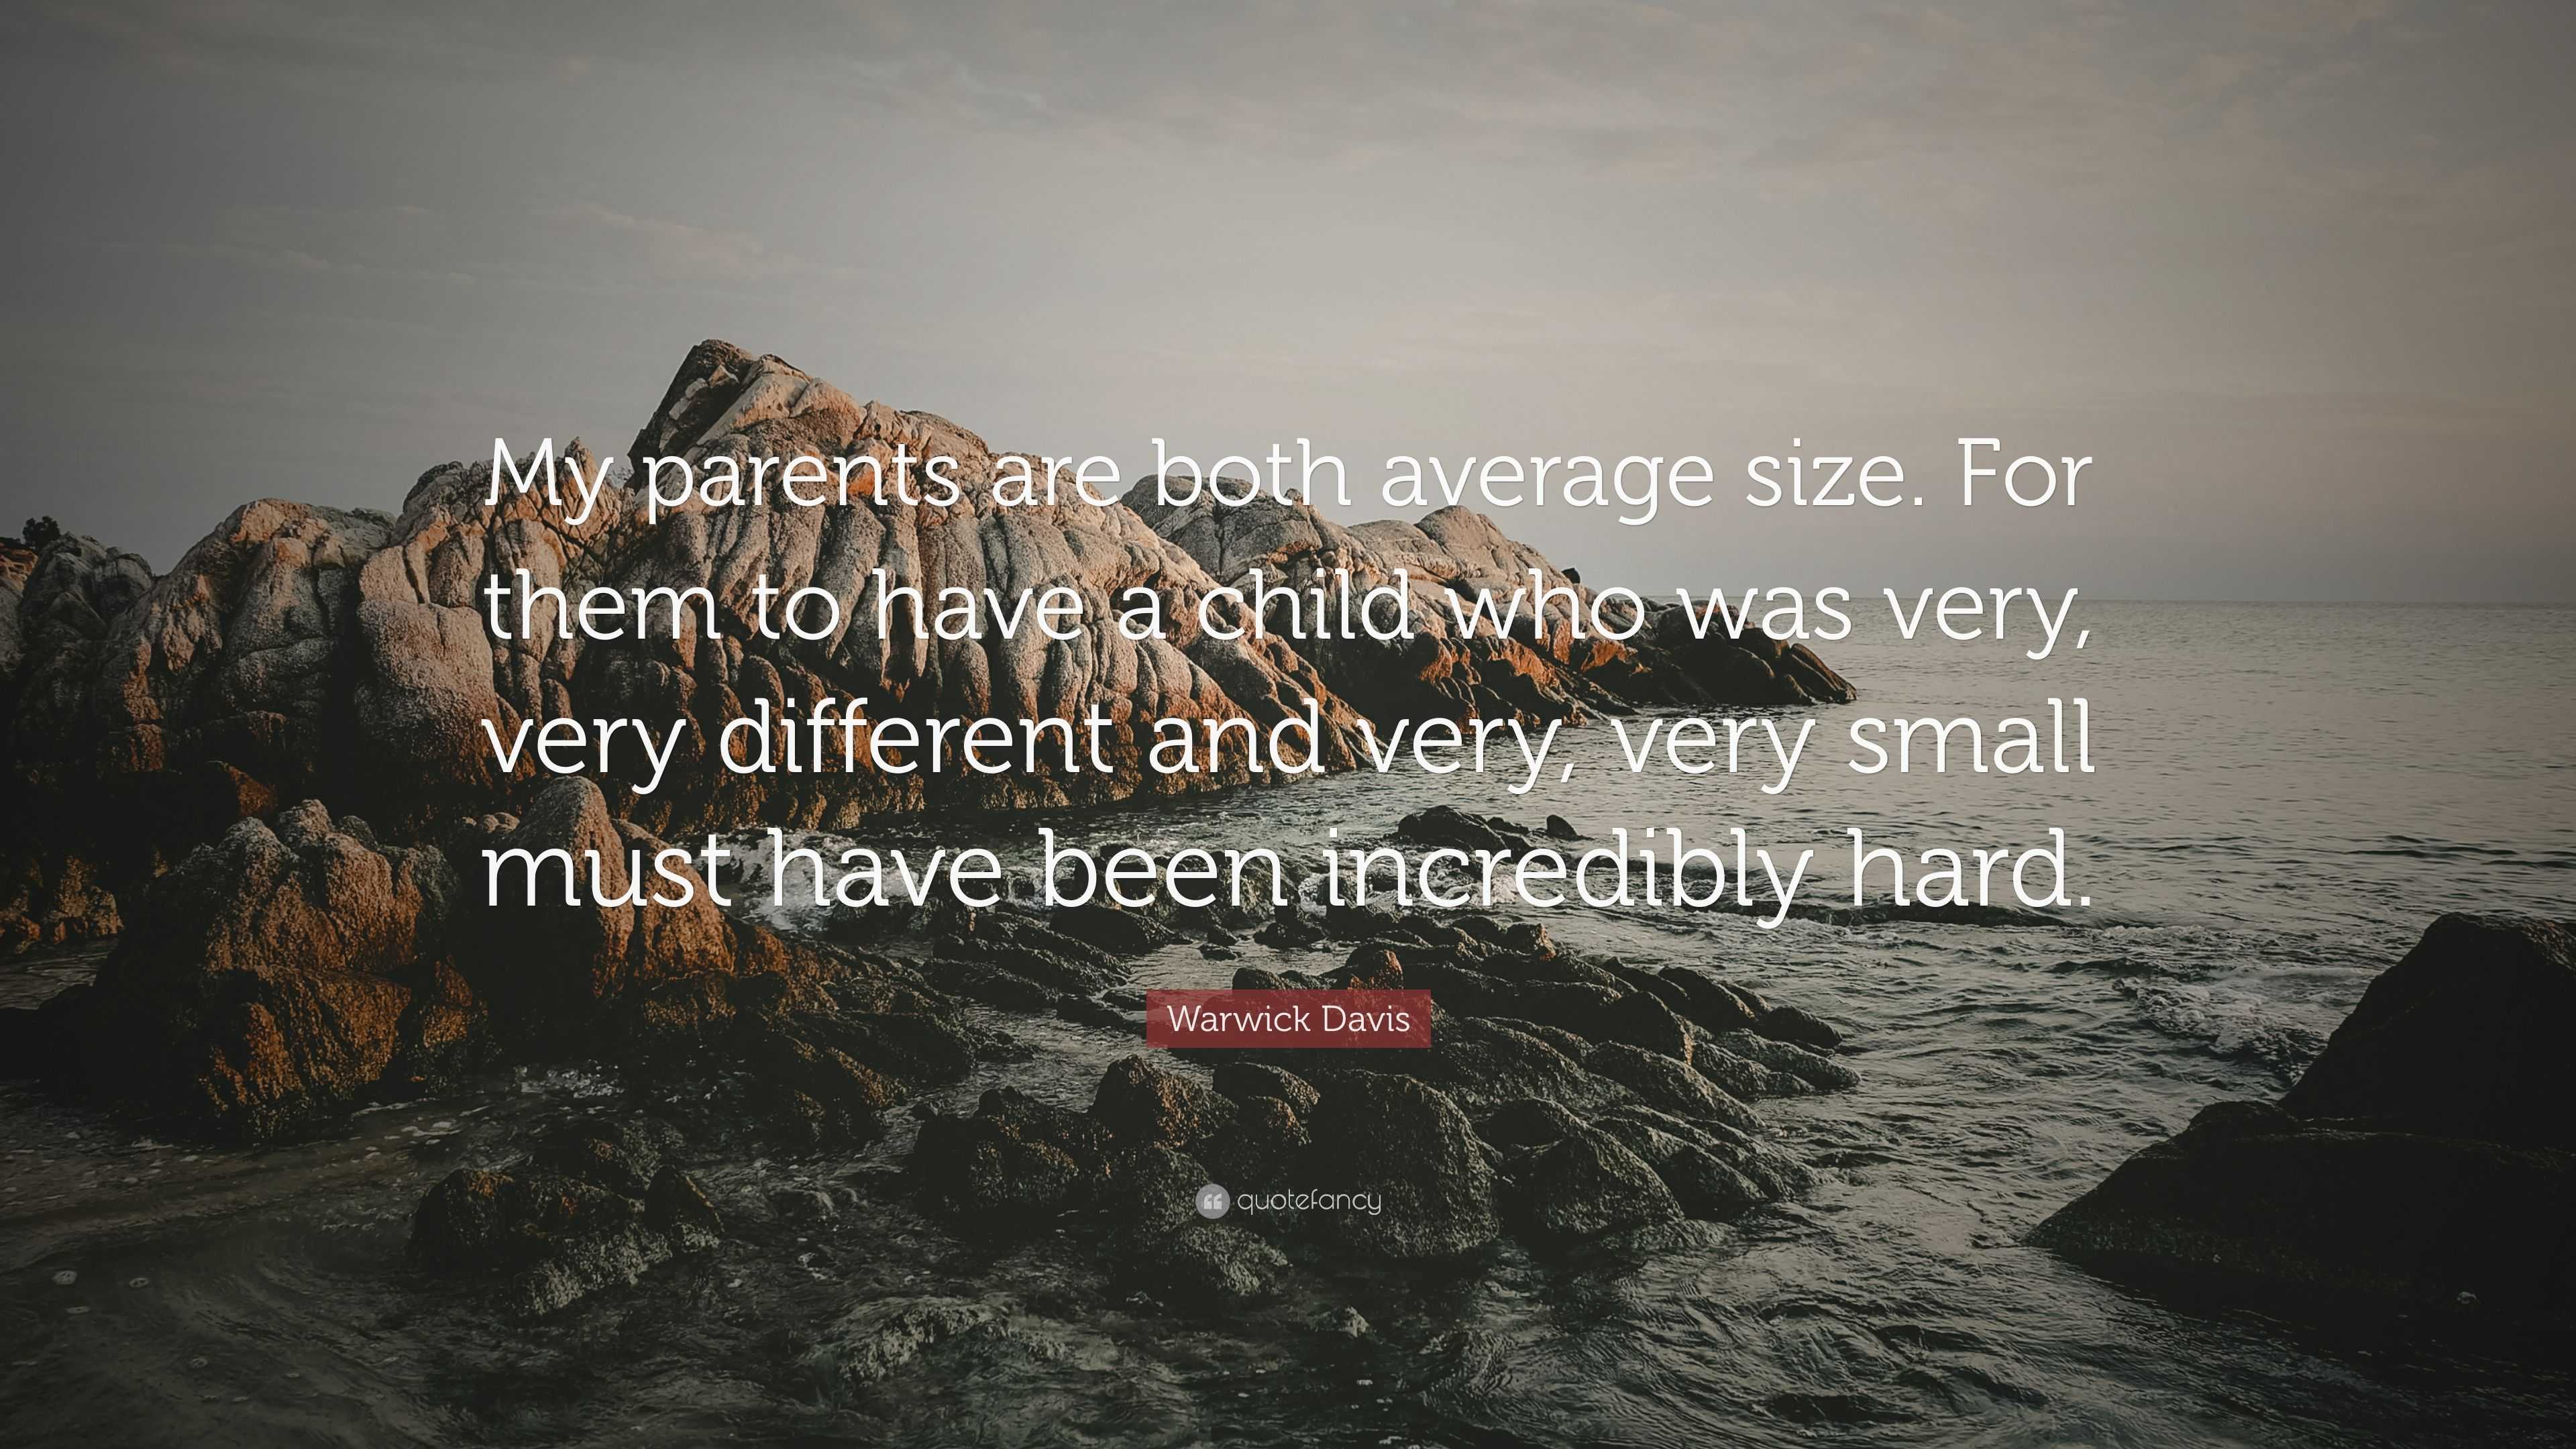 Warwick Davis Quote: “My parents are both average size. For them to have a  child who was very, very different and very, very small must have b...”